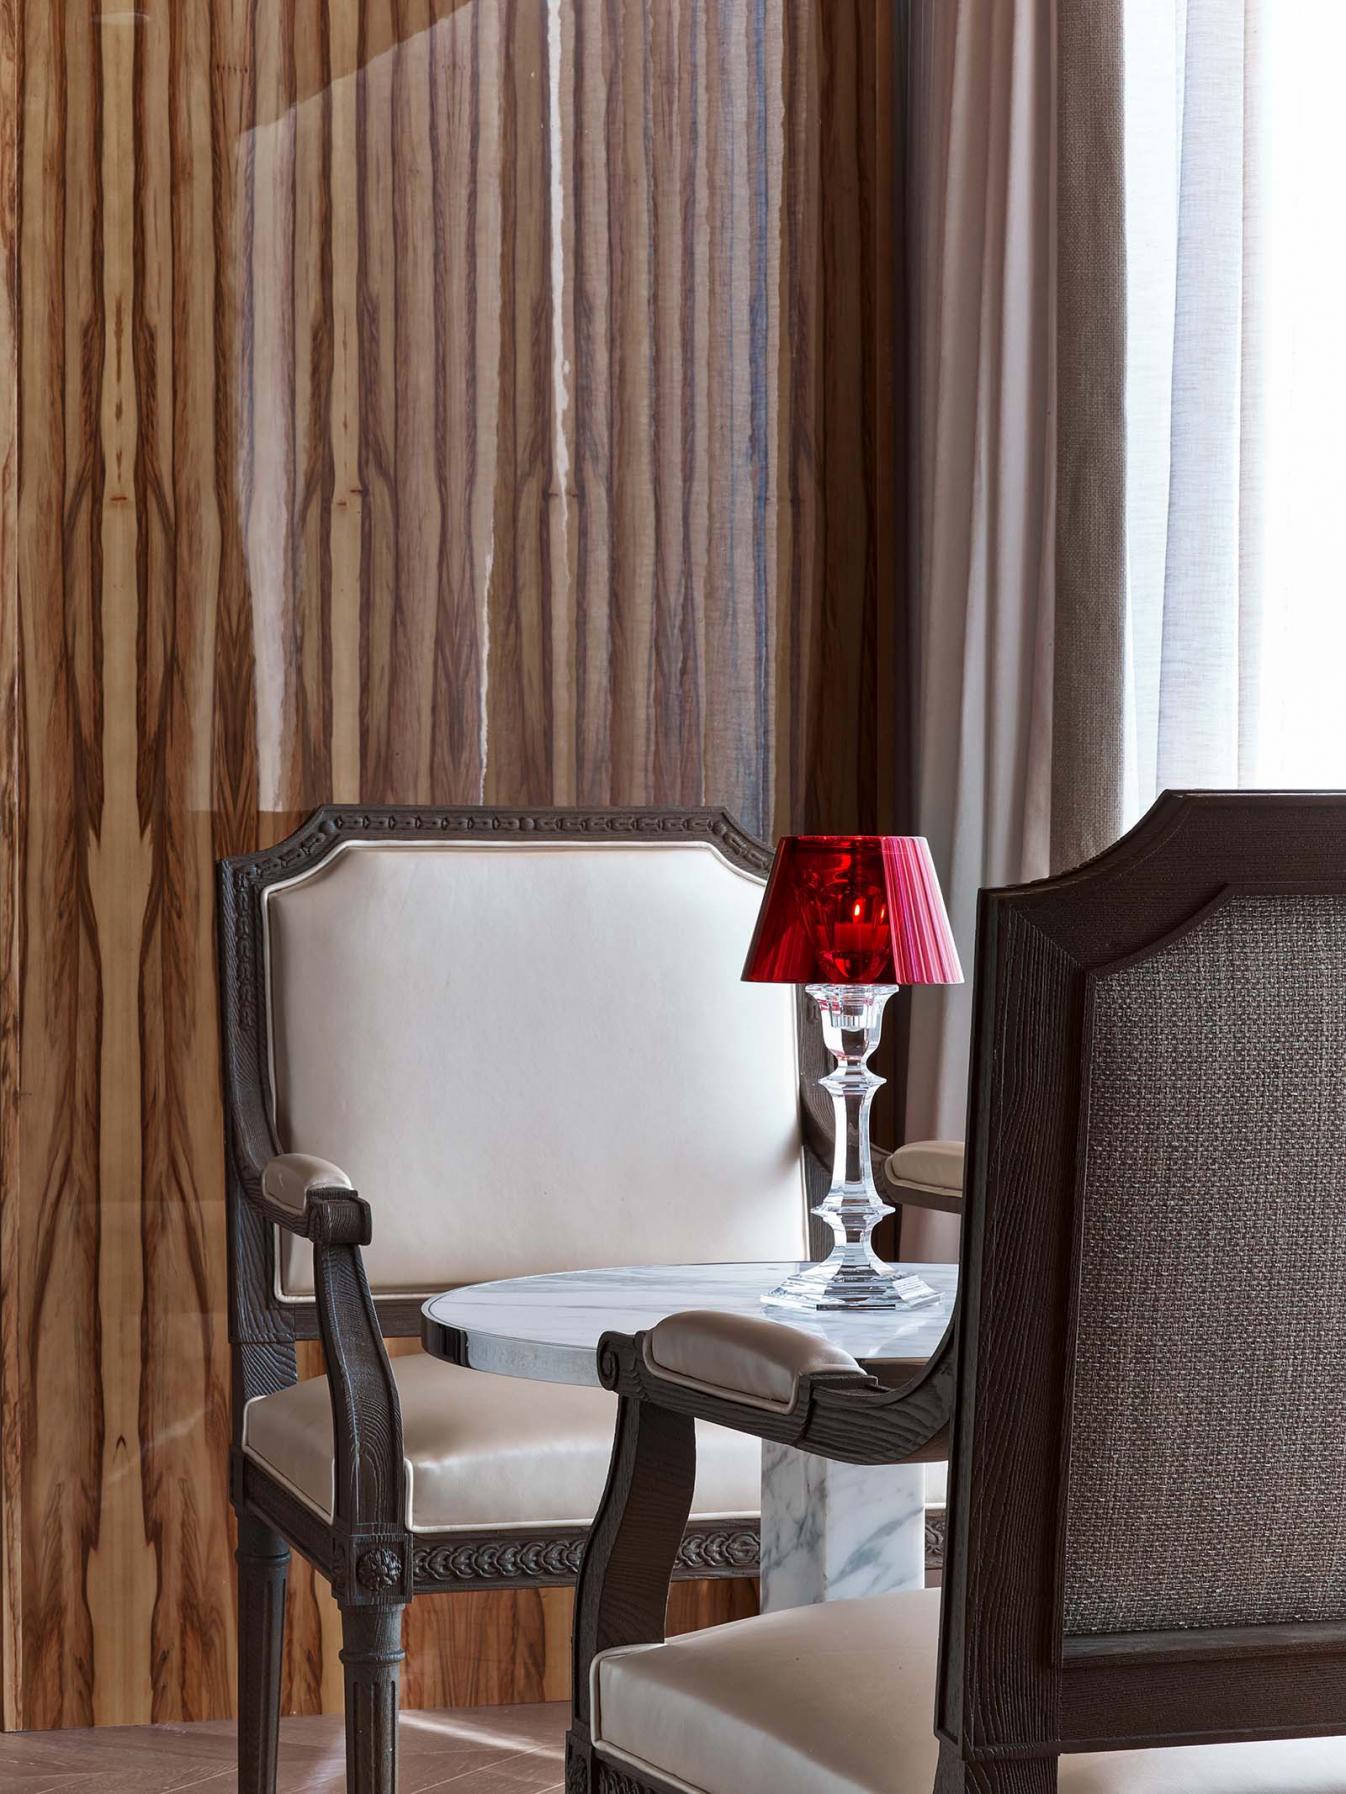 Baccarat hotel room Baccarat suite chairs and small marble table